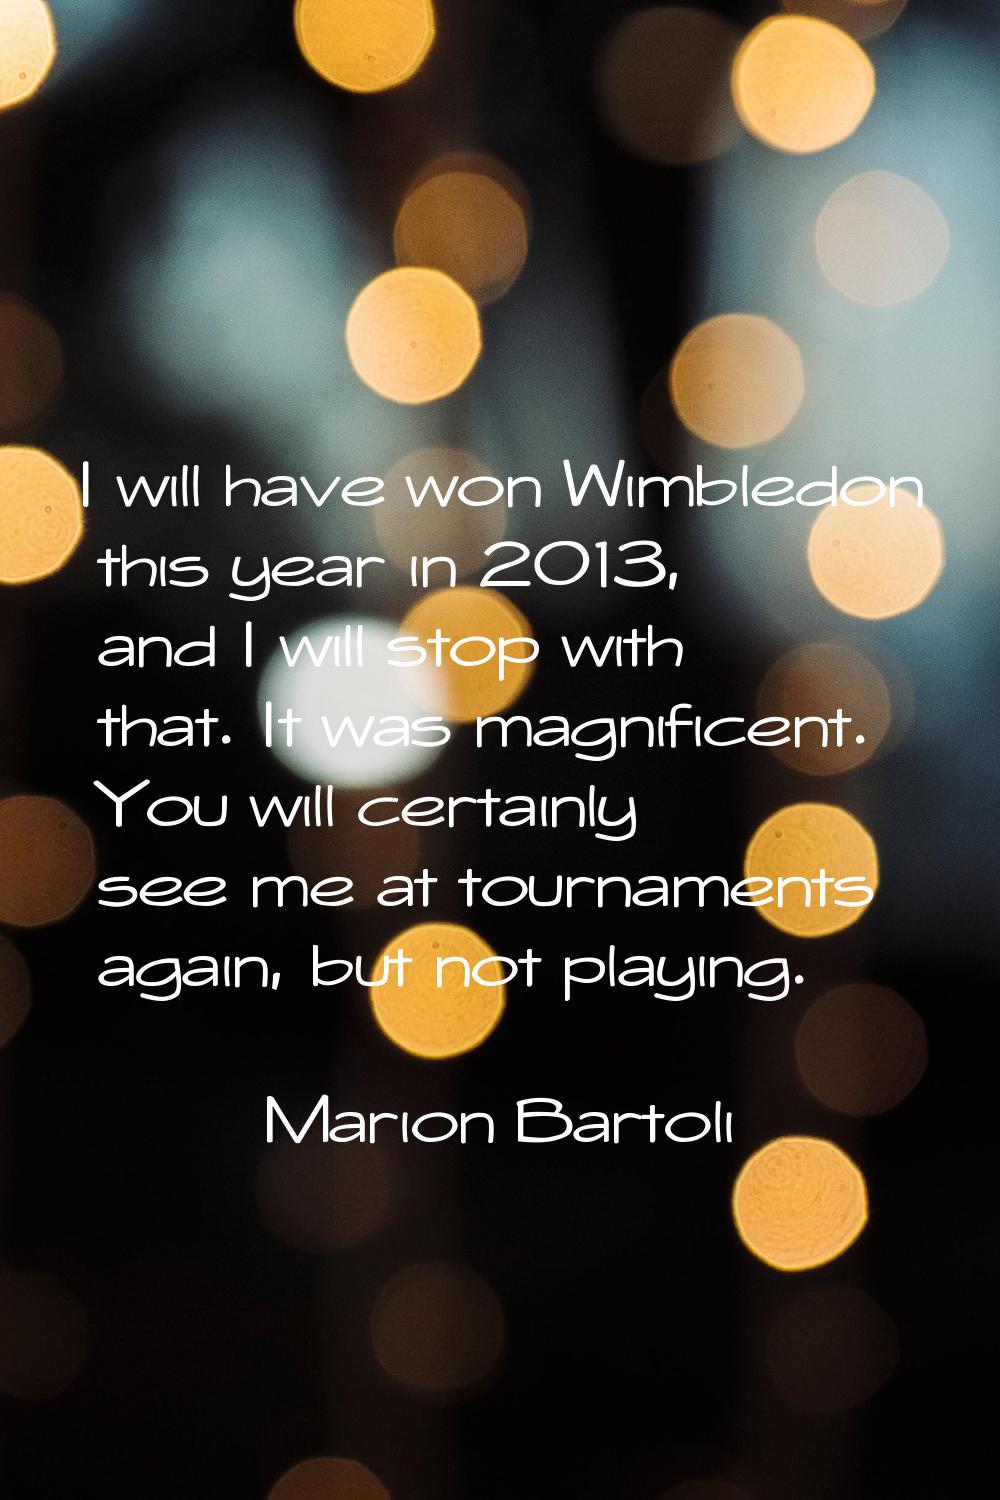 I will have won Wimbledon this year in 2013, and I will stop with that. It was magnificent. You wil